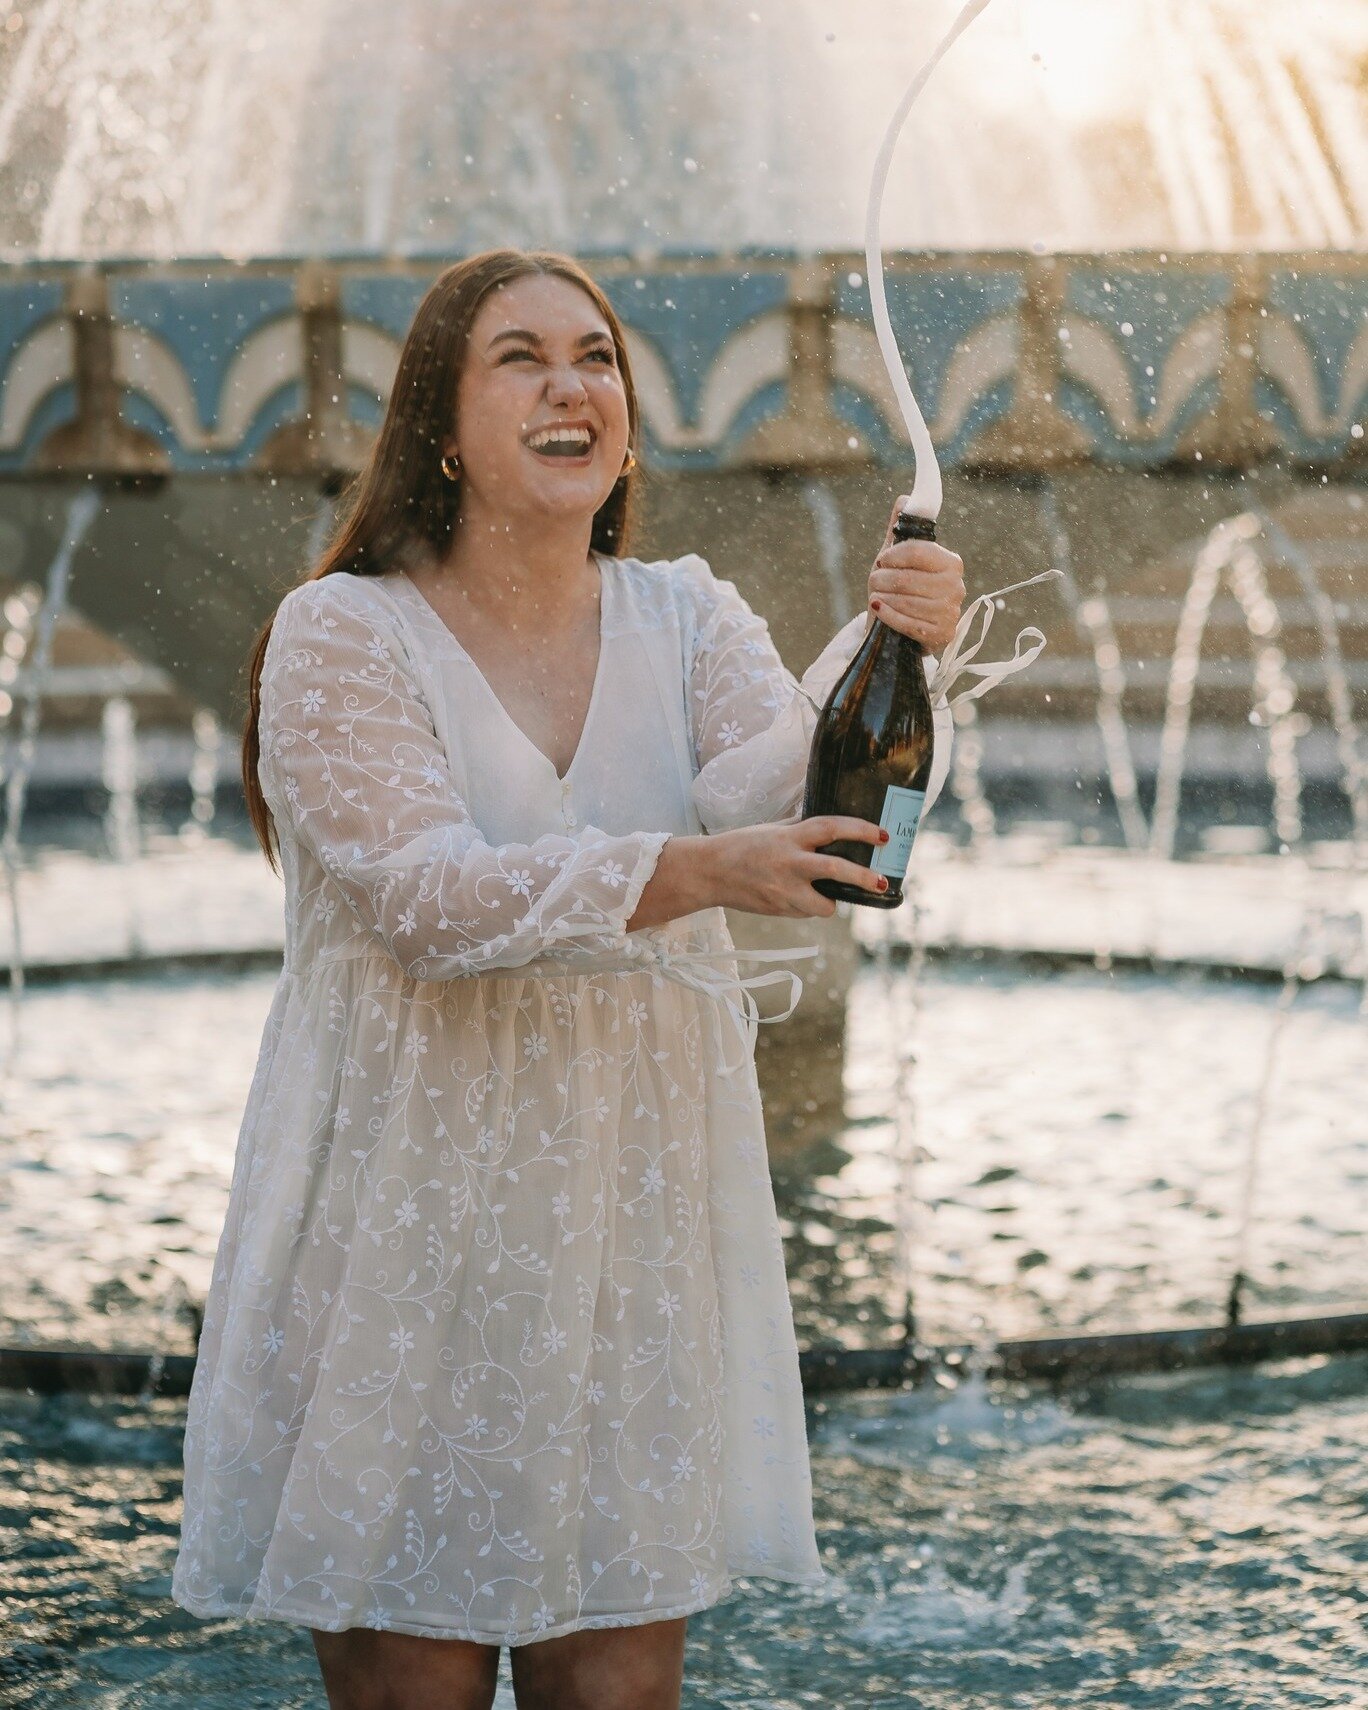 I never get tired of popping champagne and cheering for grads like Sarah!!!!

Spring 2023 GRADZZ! I am down to limited availability this spring. DM me if you're interested in booking before graduation!!